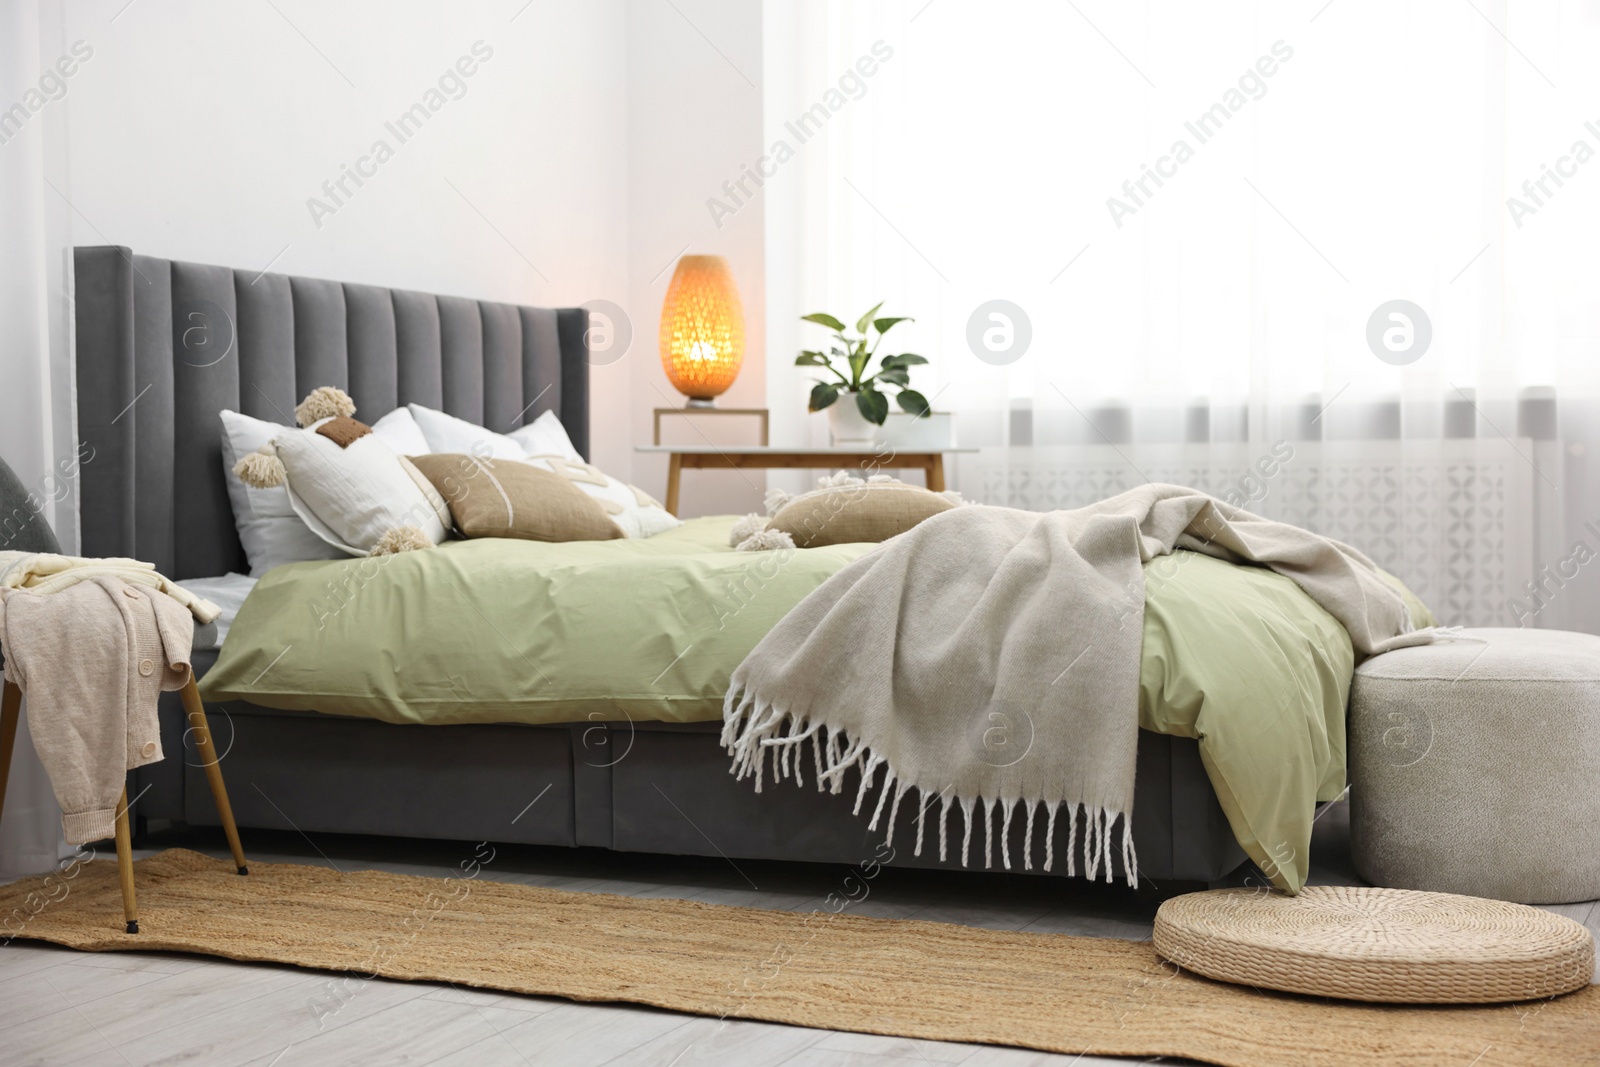 Photo of Soft plaid on bed in stylish bedroom